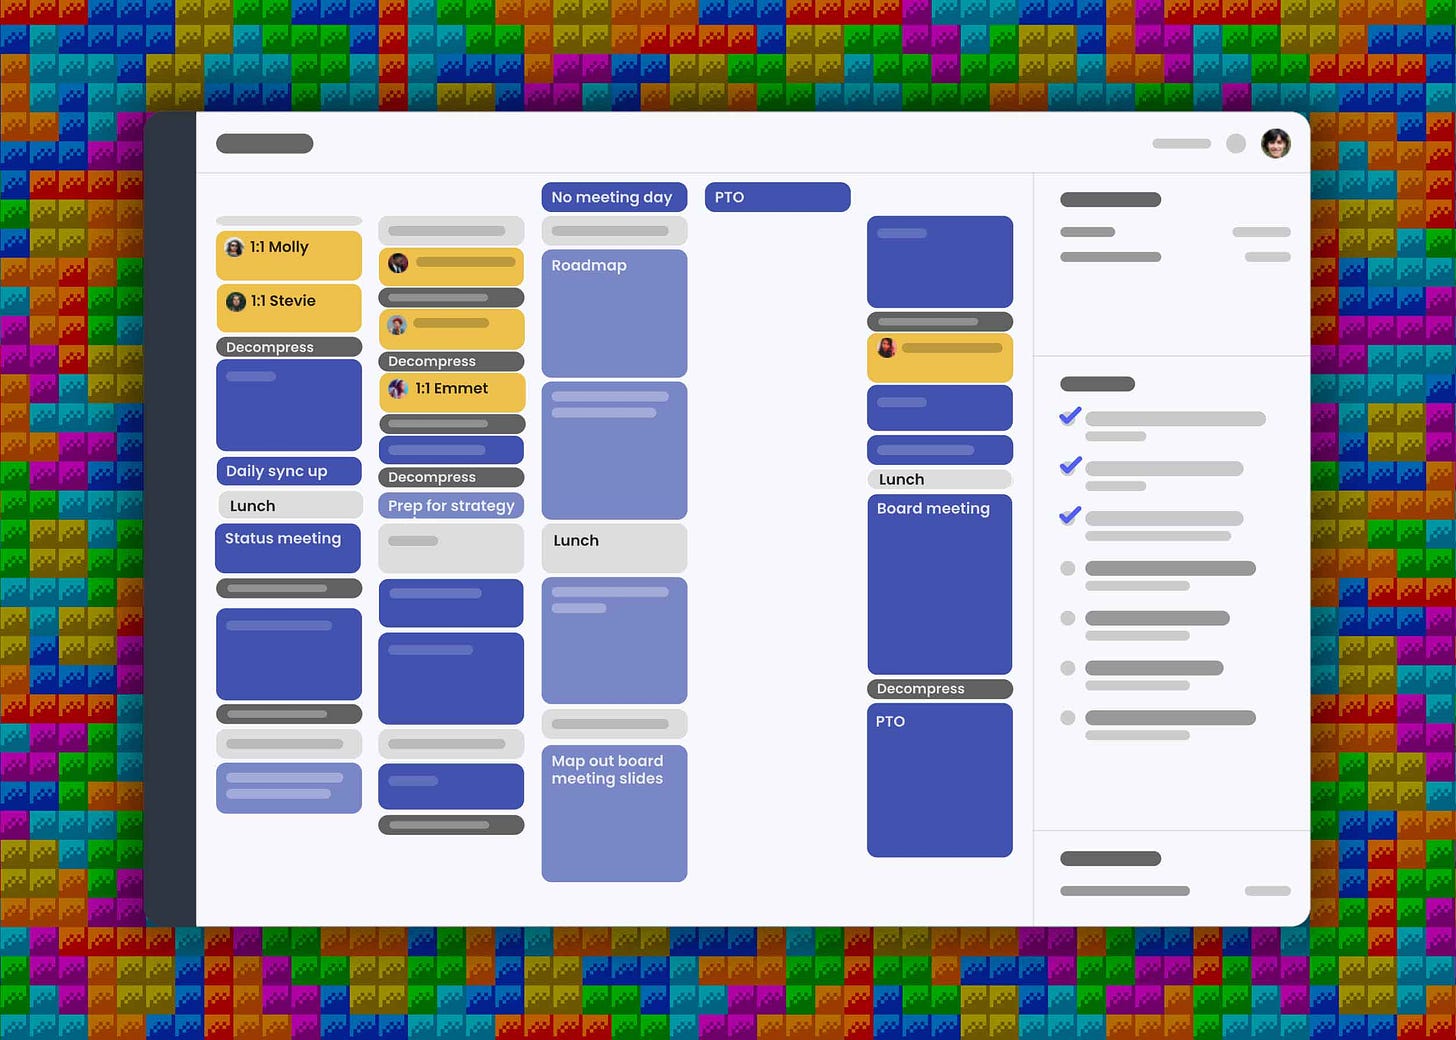 Illustration showing a well-organized calendar with time blocks, time off, and a no-meeting Wednesday, superimposed on a colorful background of Tetris blocks.